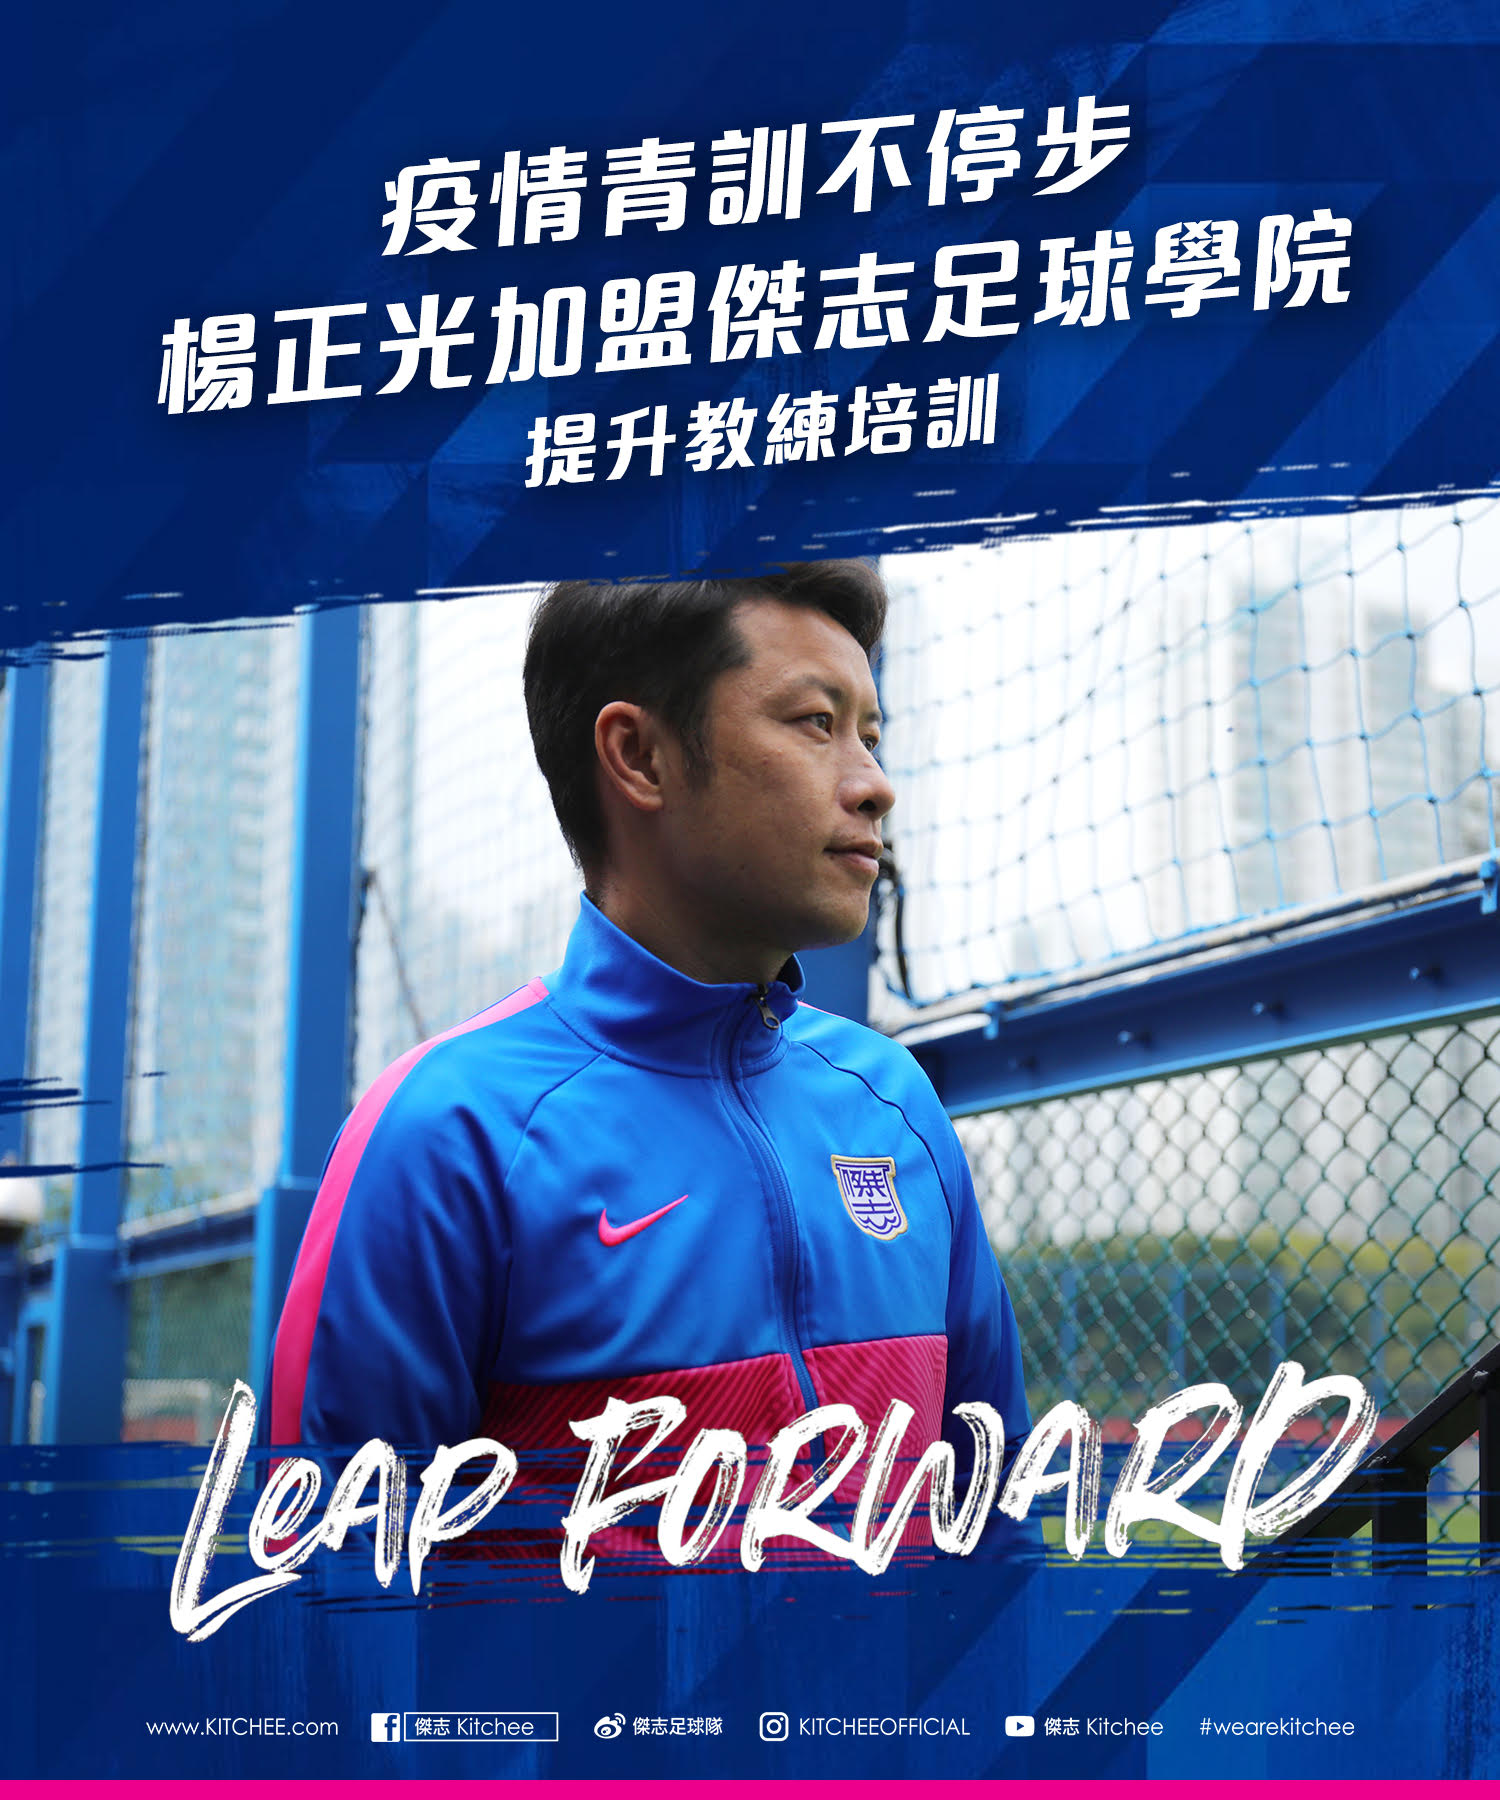 Kitchee Confirm Yeung Ching Kwong Appointment to Enhance Coach Development.